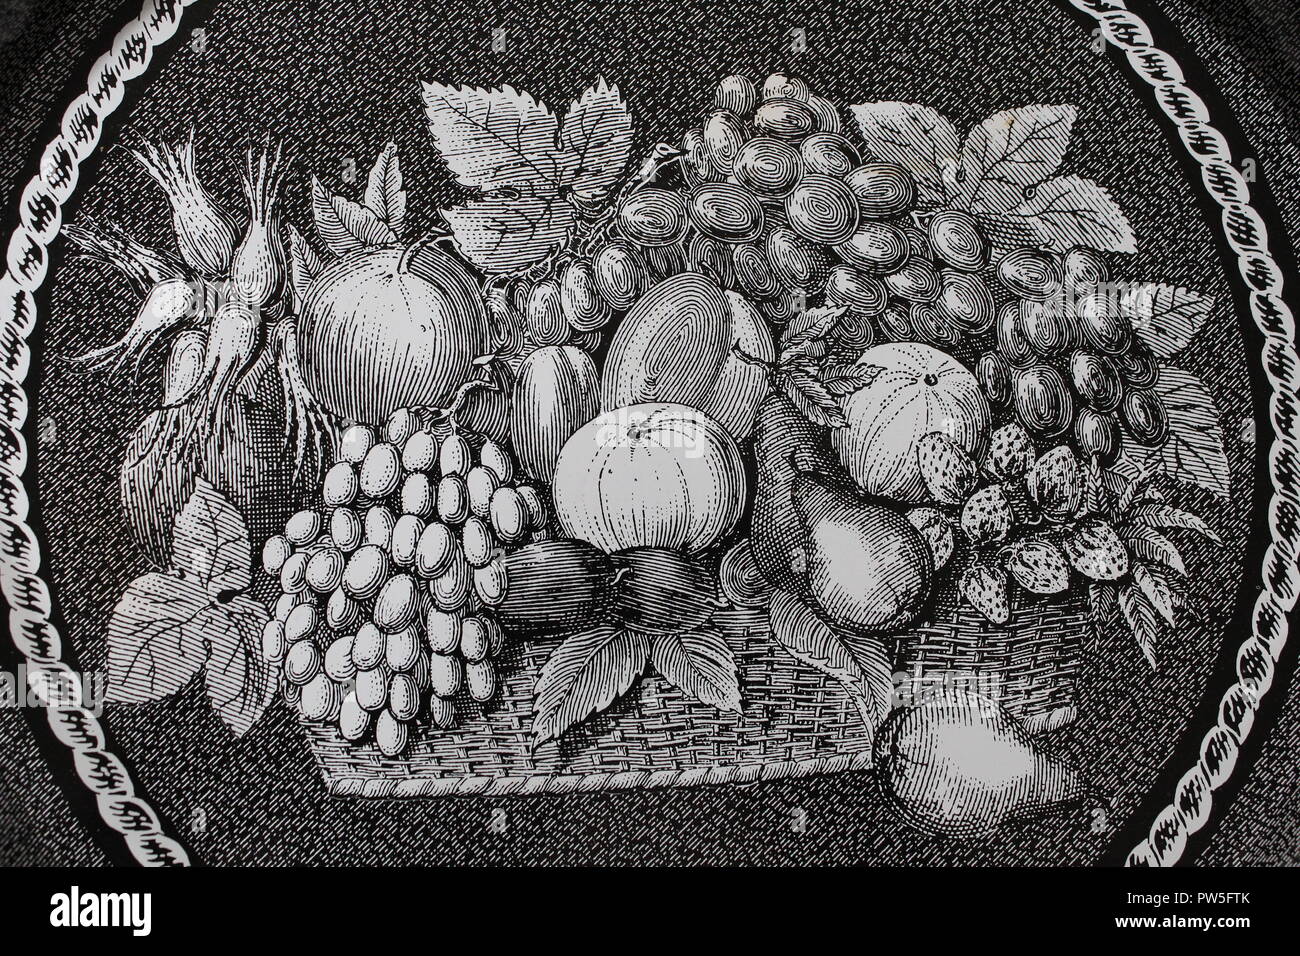 Black and white image of plants and fruits Stock Photo